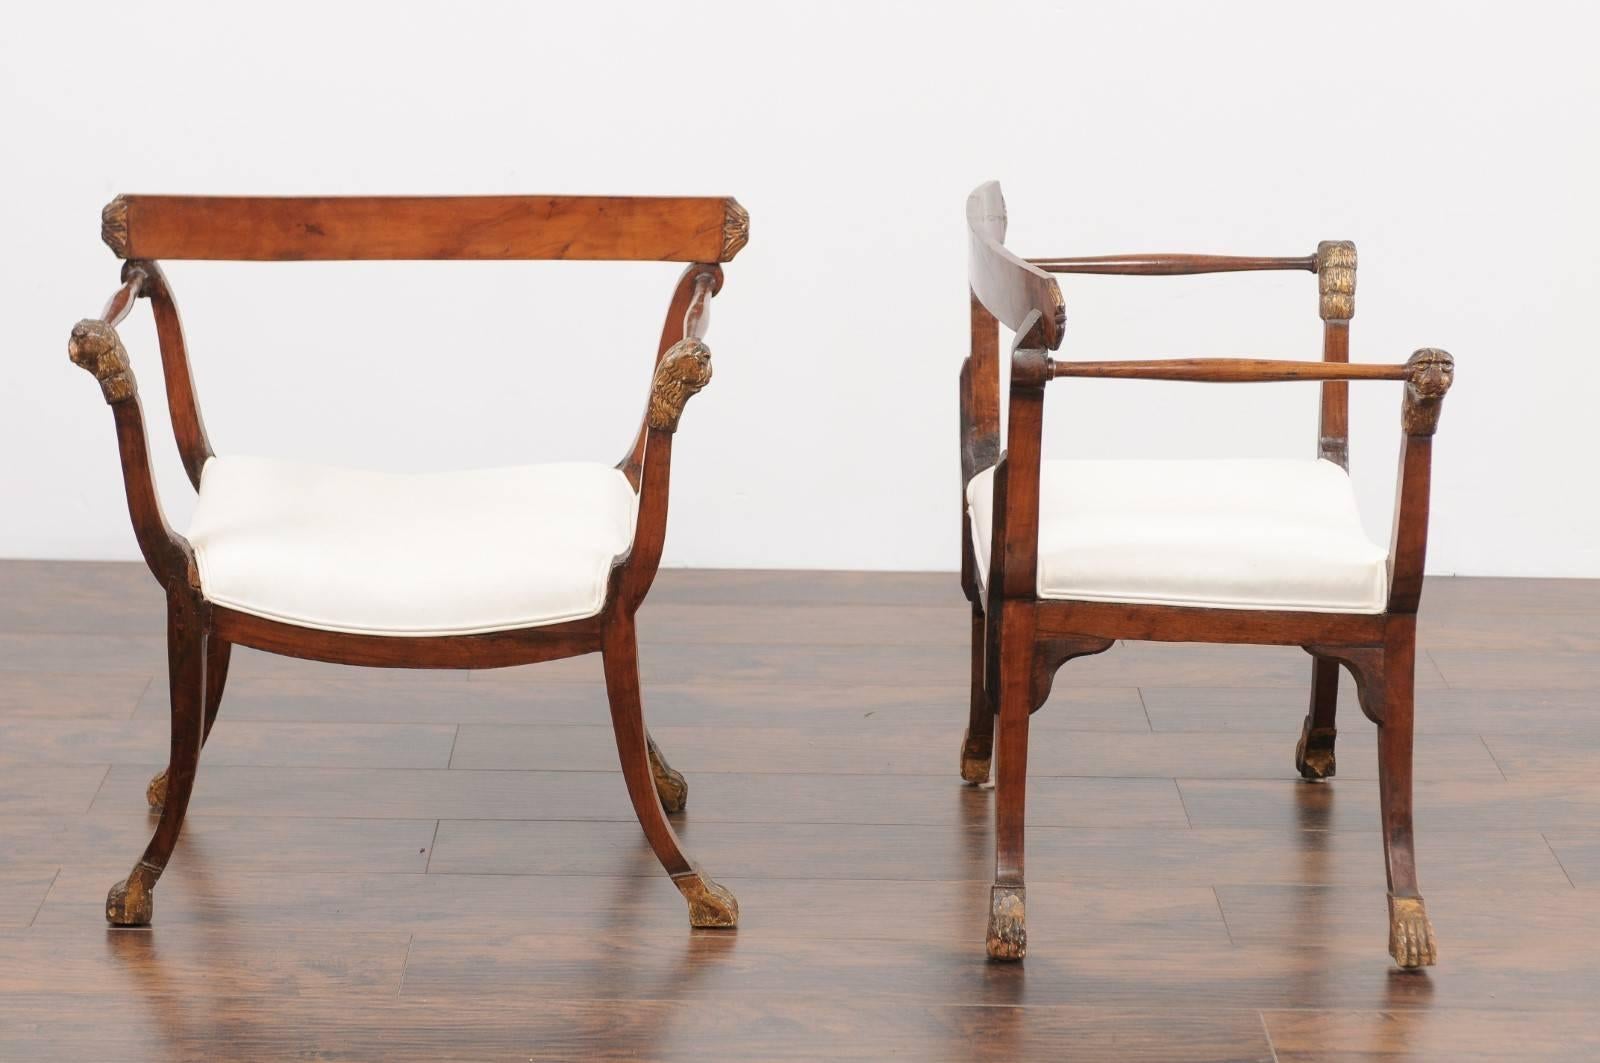 Pair of 18th Century Italian Upholstered Seat Walnut Chairs with Lion Details 5